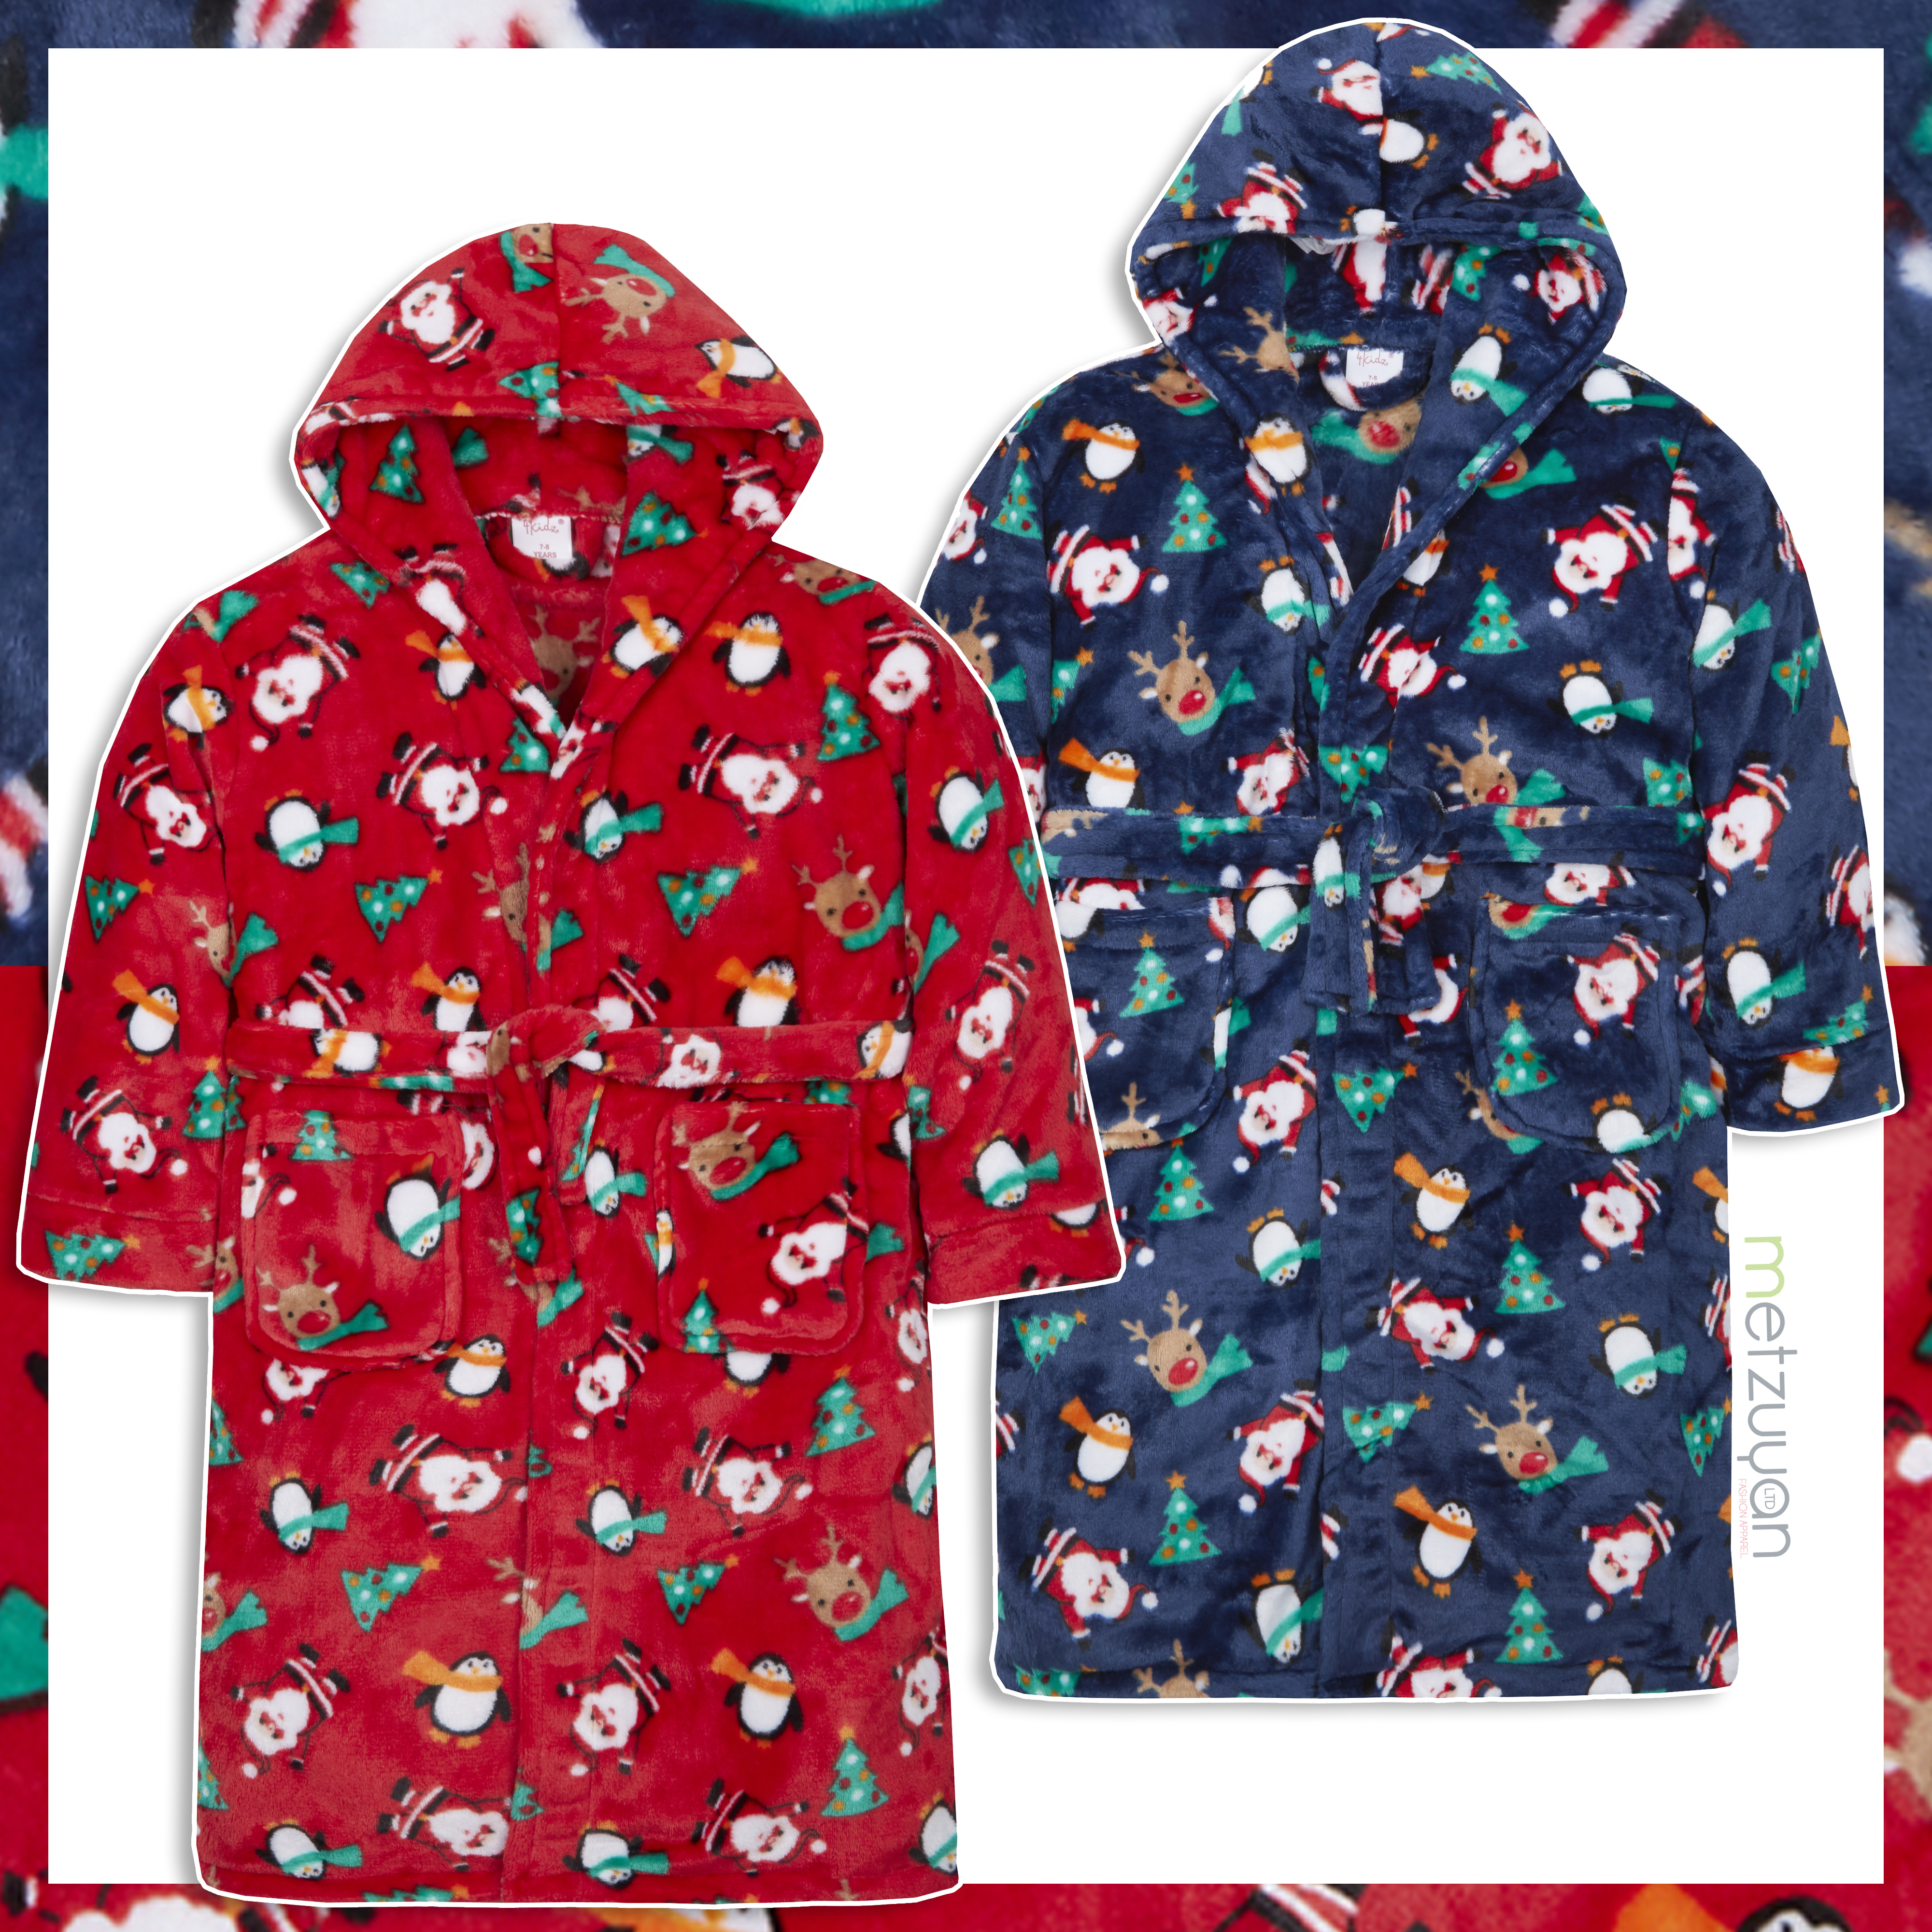 SALE Kids UNISEX Christmas Super Soft Fleece Dressing Gown Ages 2-13 Years NEW